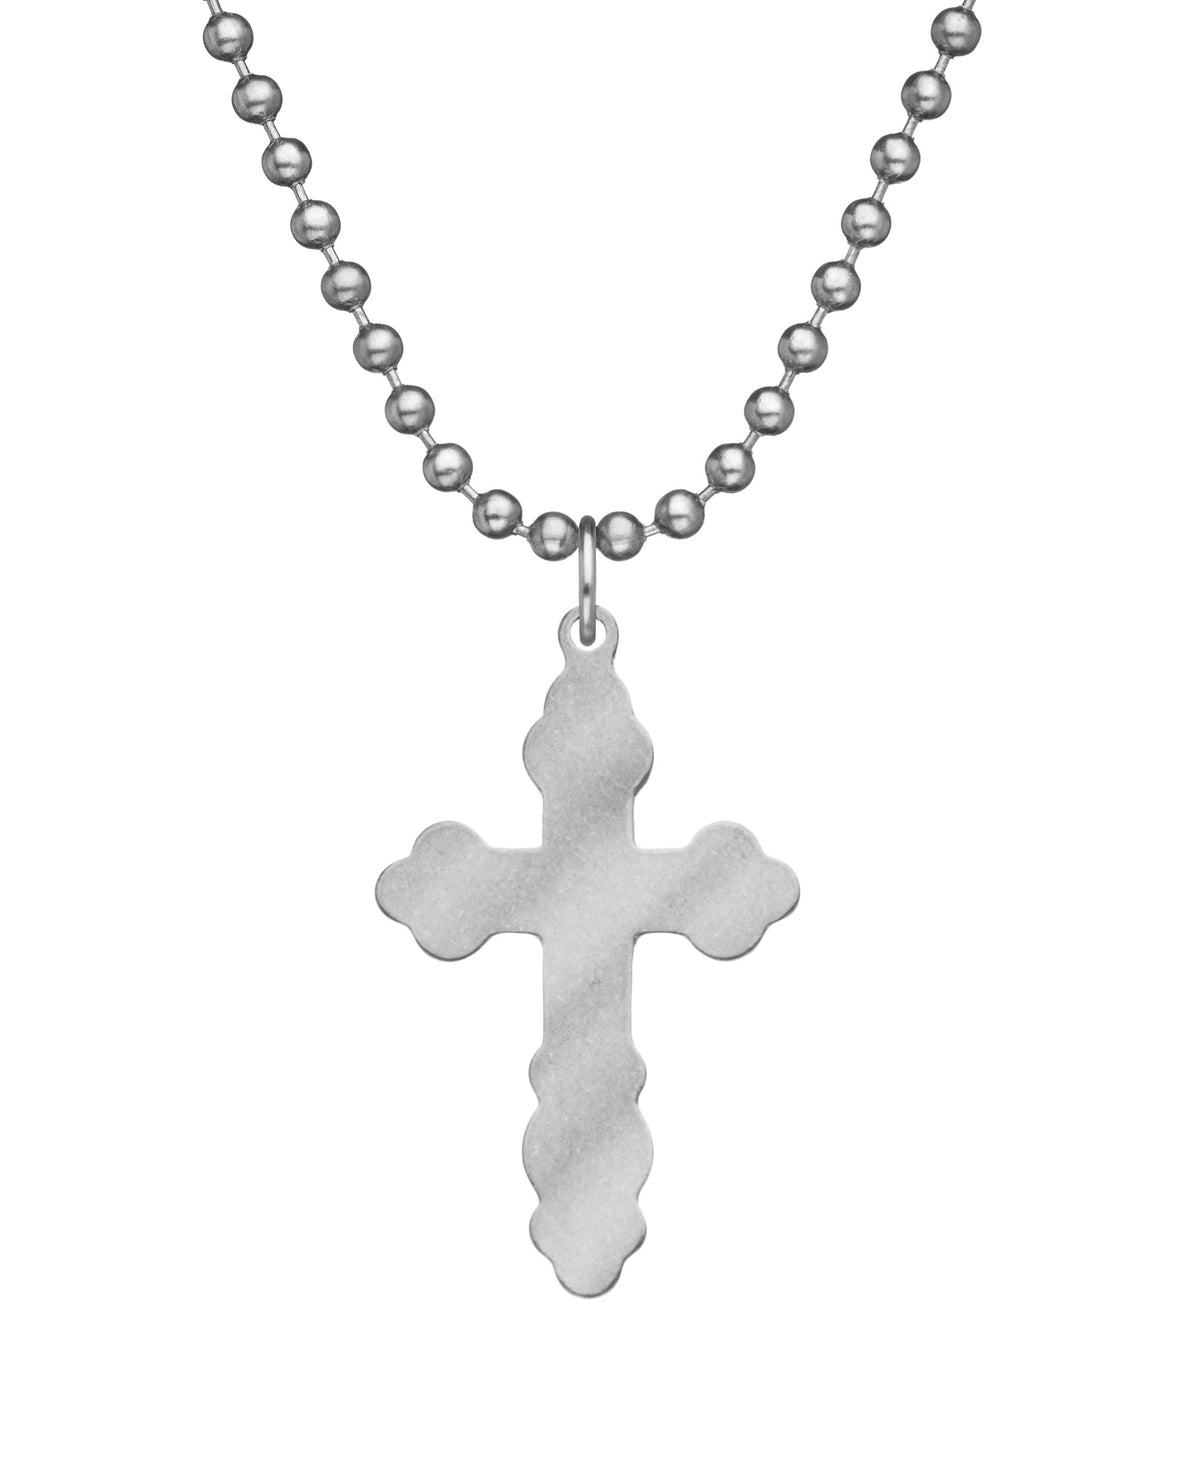 Genuine U.S. Military Issue Byzantine Cross Necklace with Dog Tag Chain